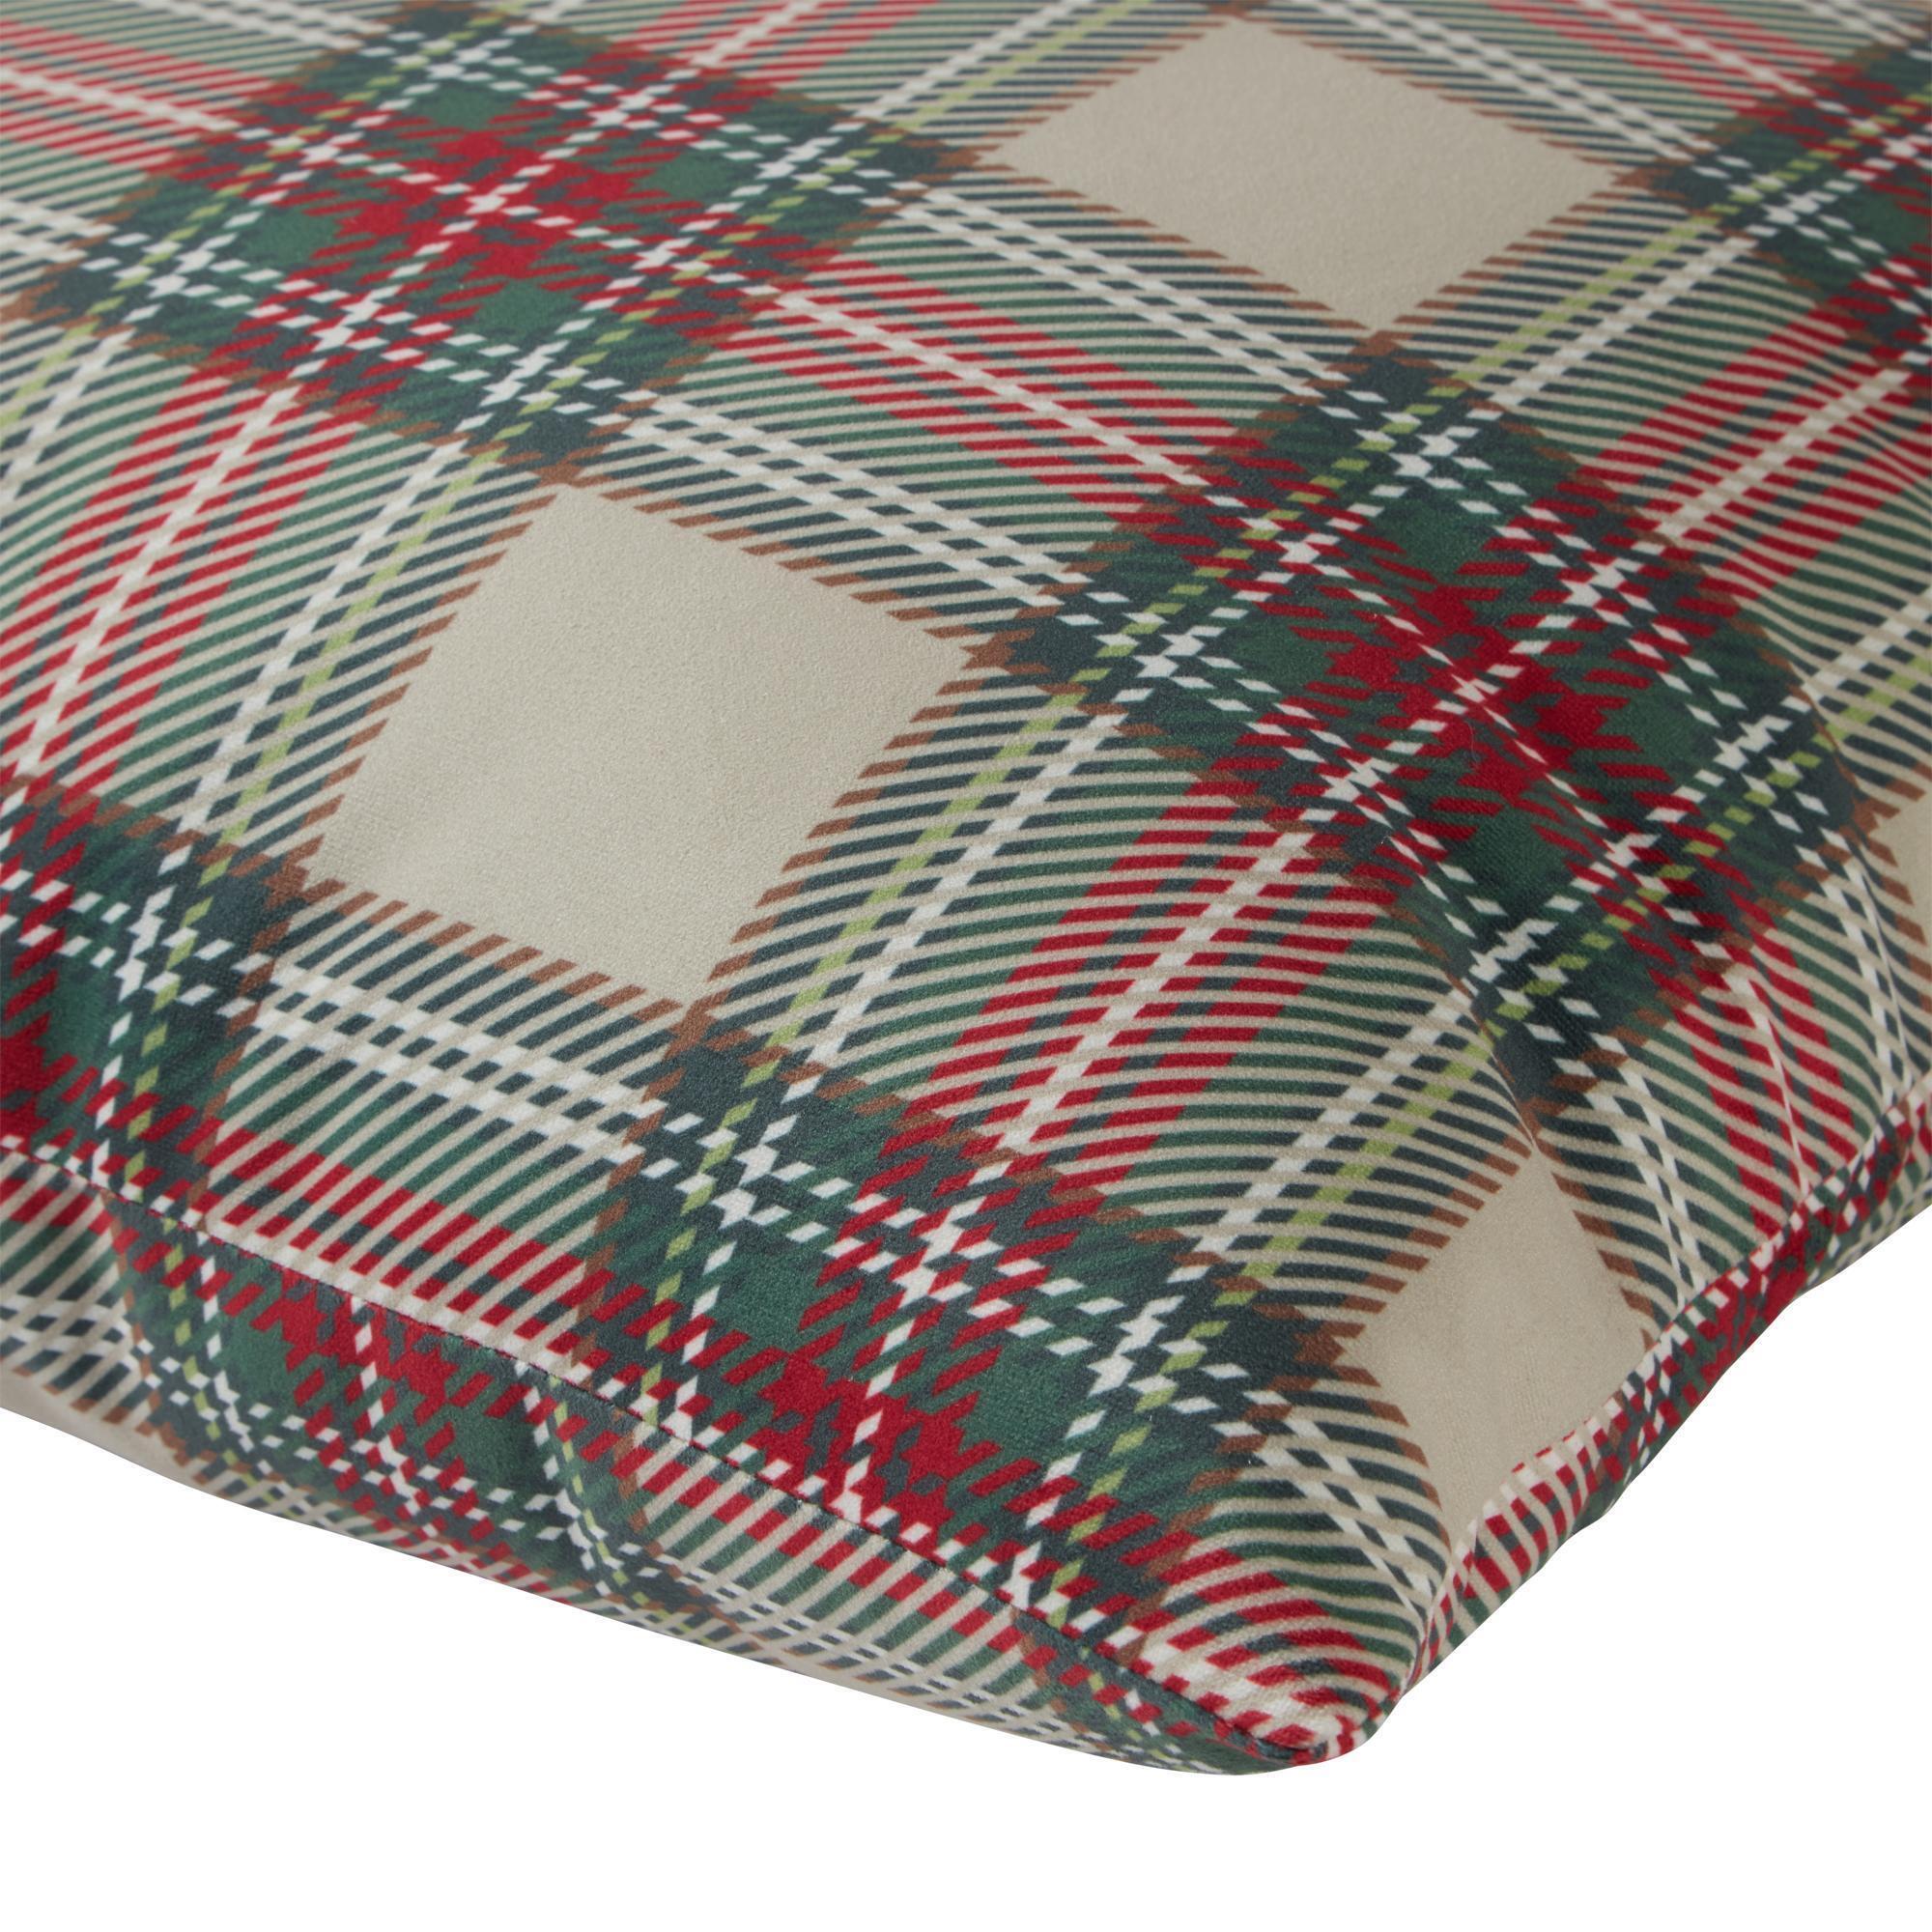 18" Red and White Plaid Christmas Square Throw Pillow alternate image